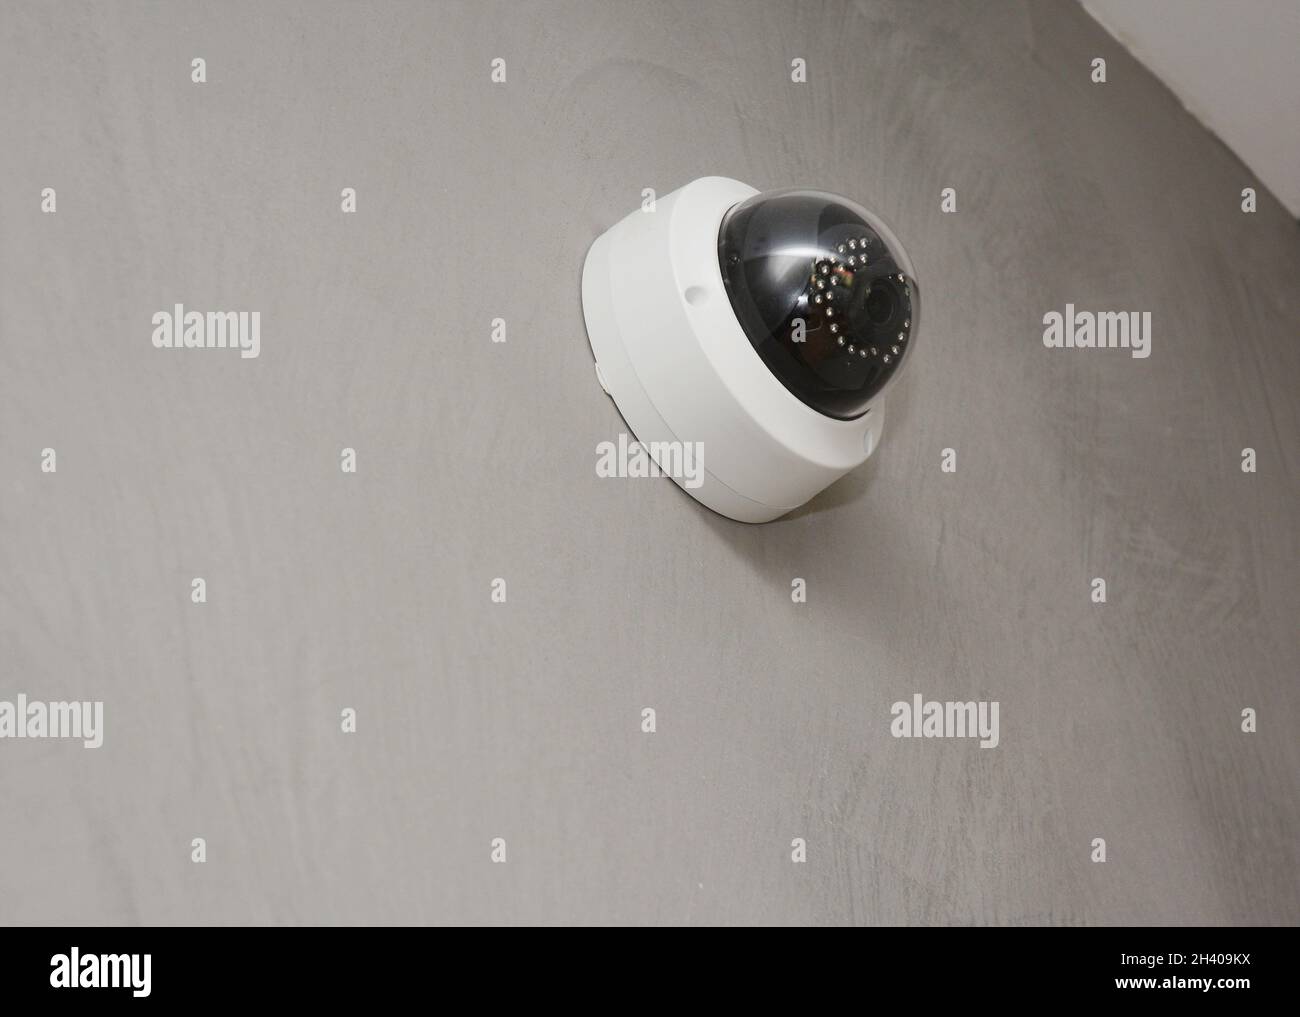 Security  CCTV camera is mounted on the room wall. Stock Photo